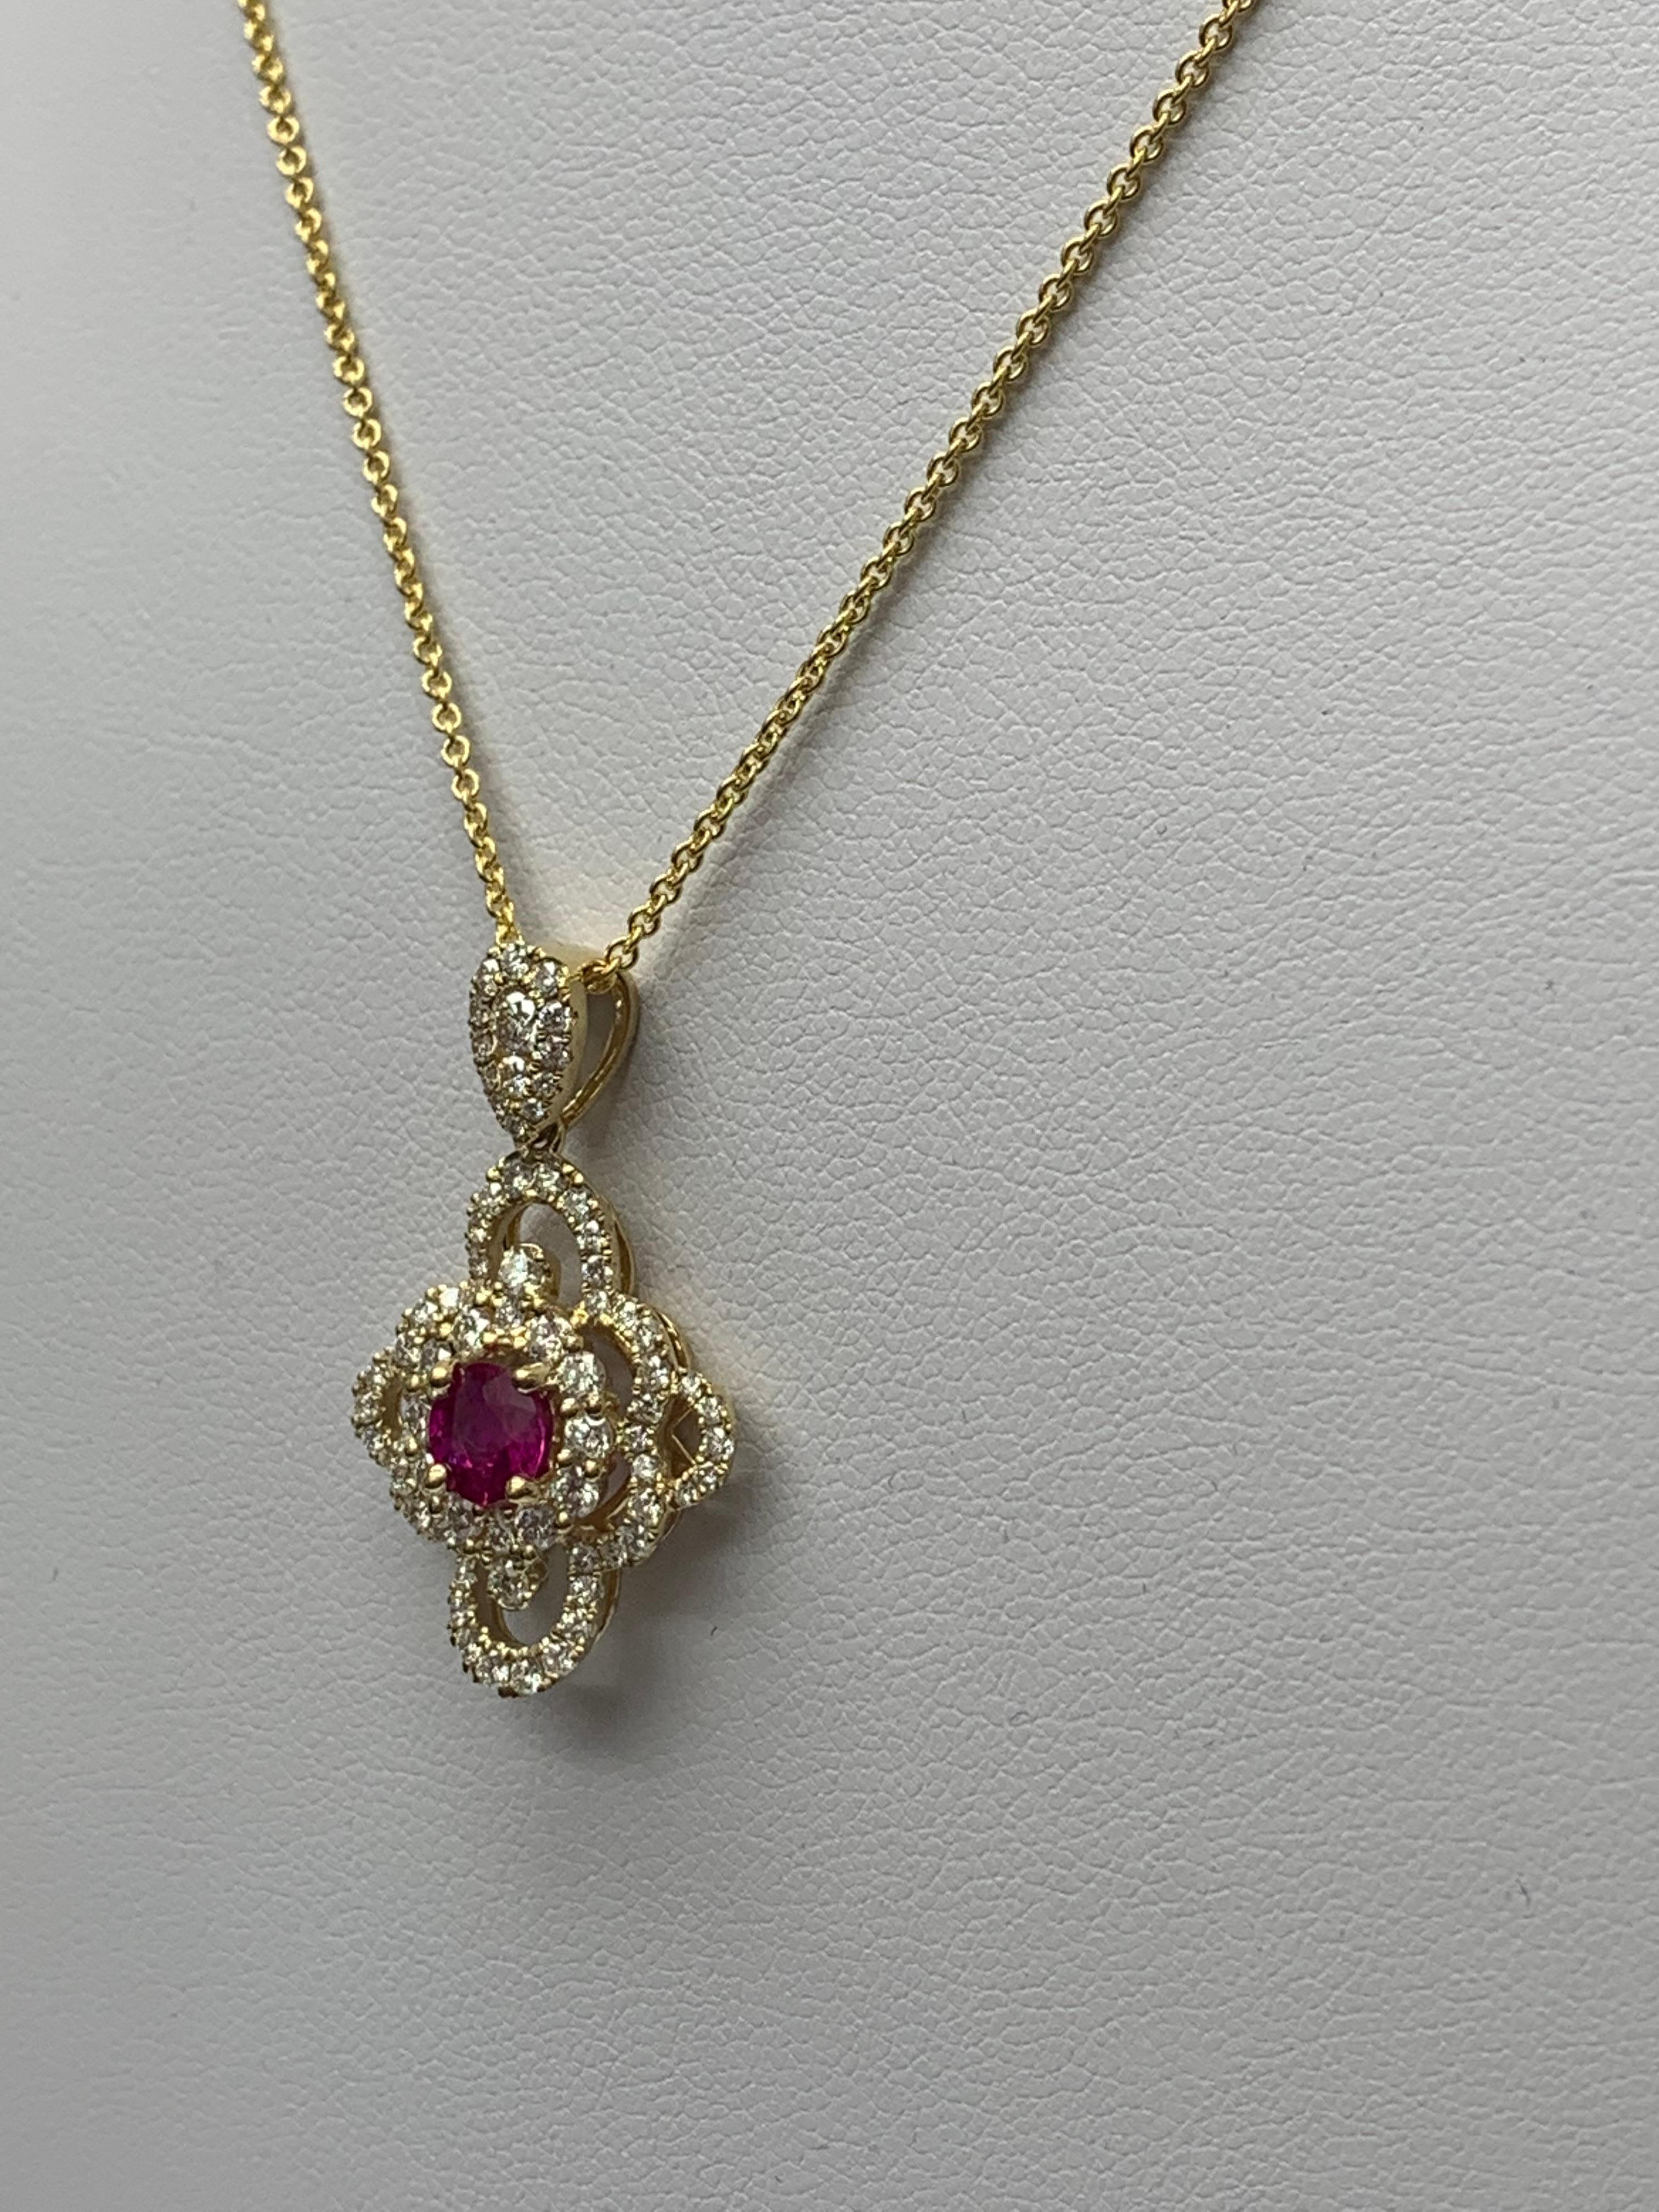 0.67 Carat Round Cut Ruby and Diamond Pendant Necklace in 18K Yellow Gold For Sale 2